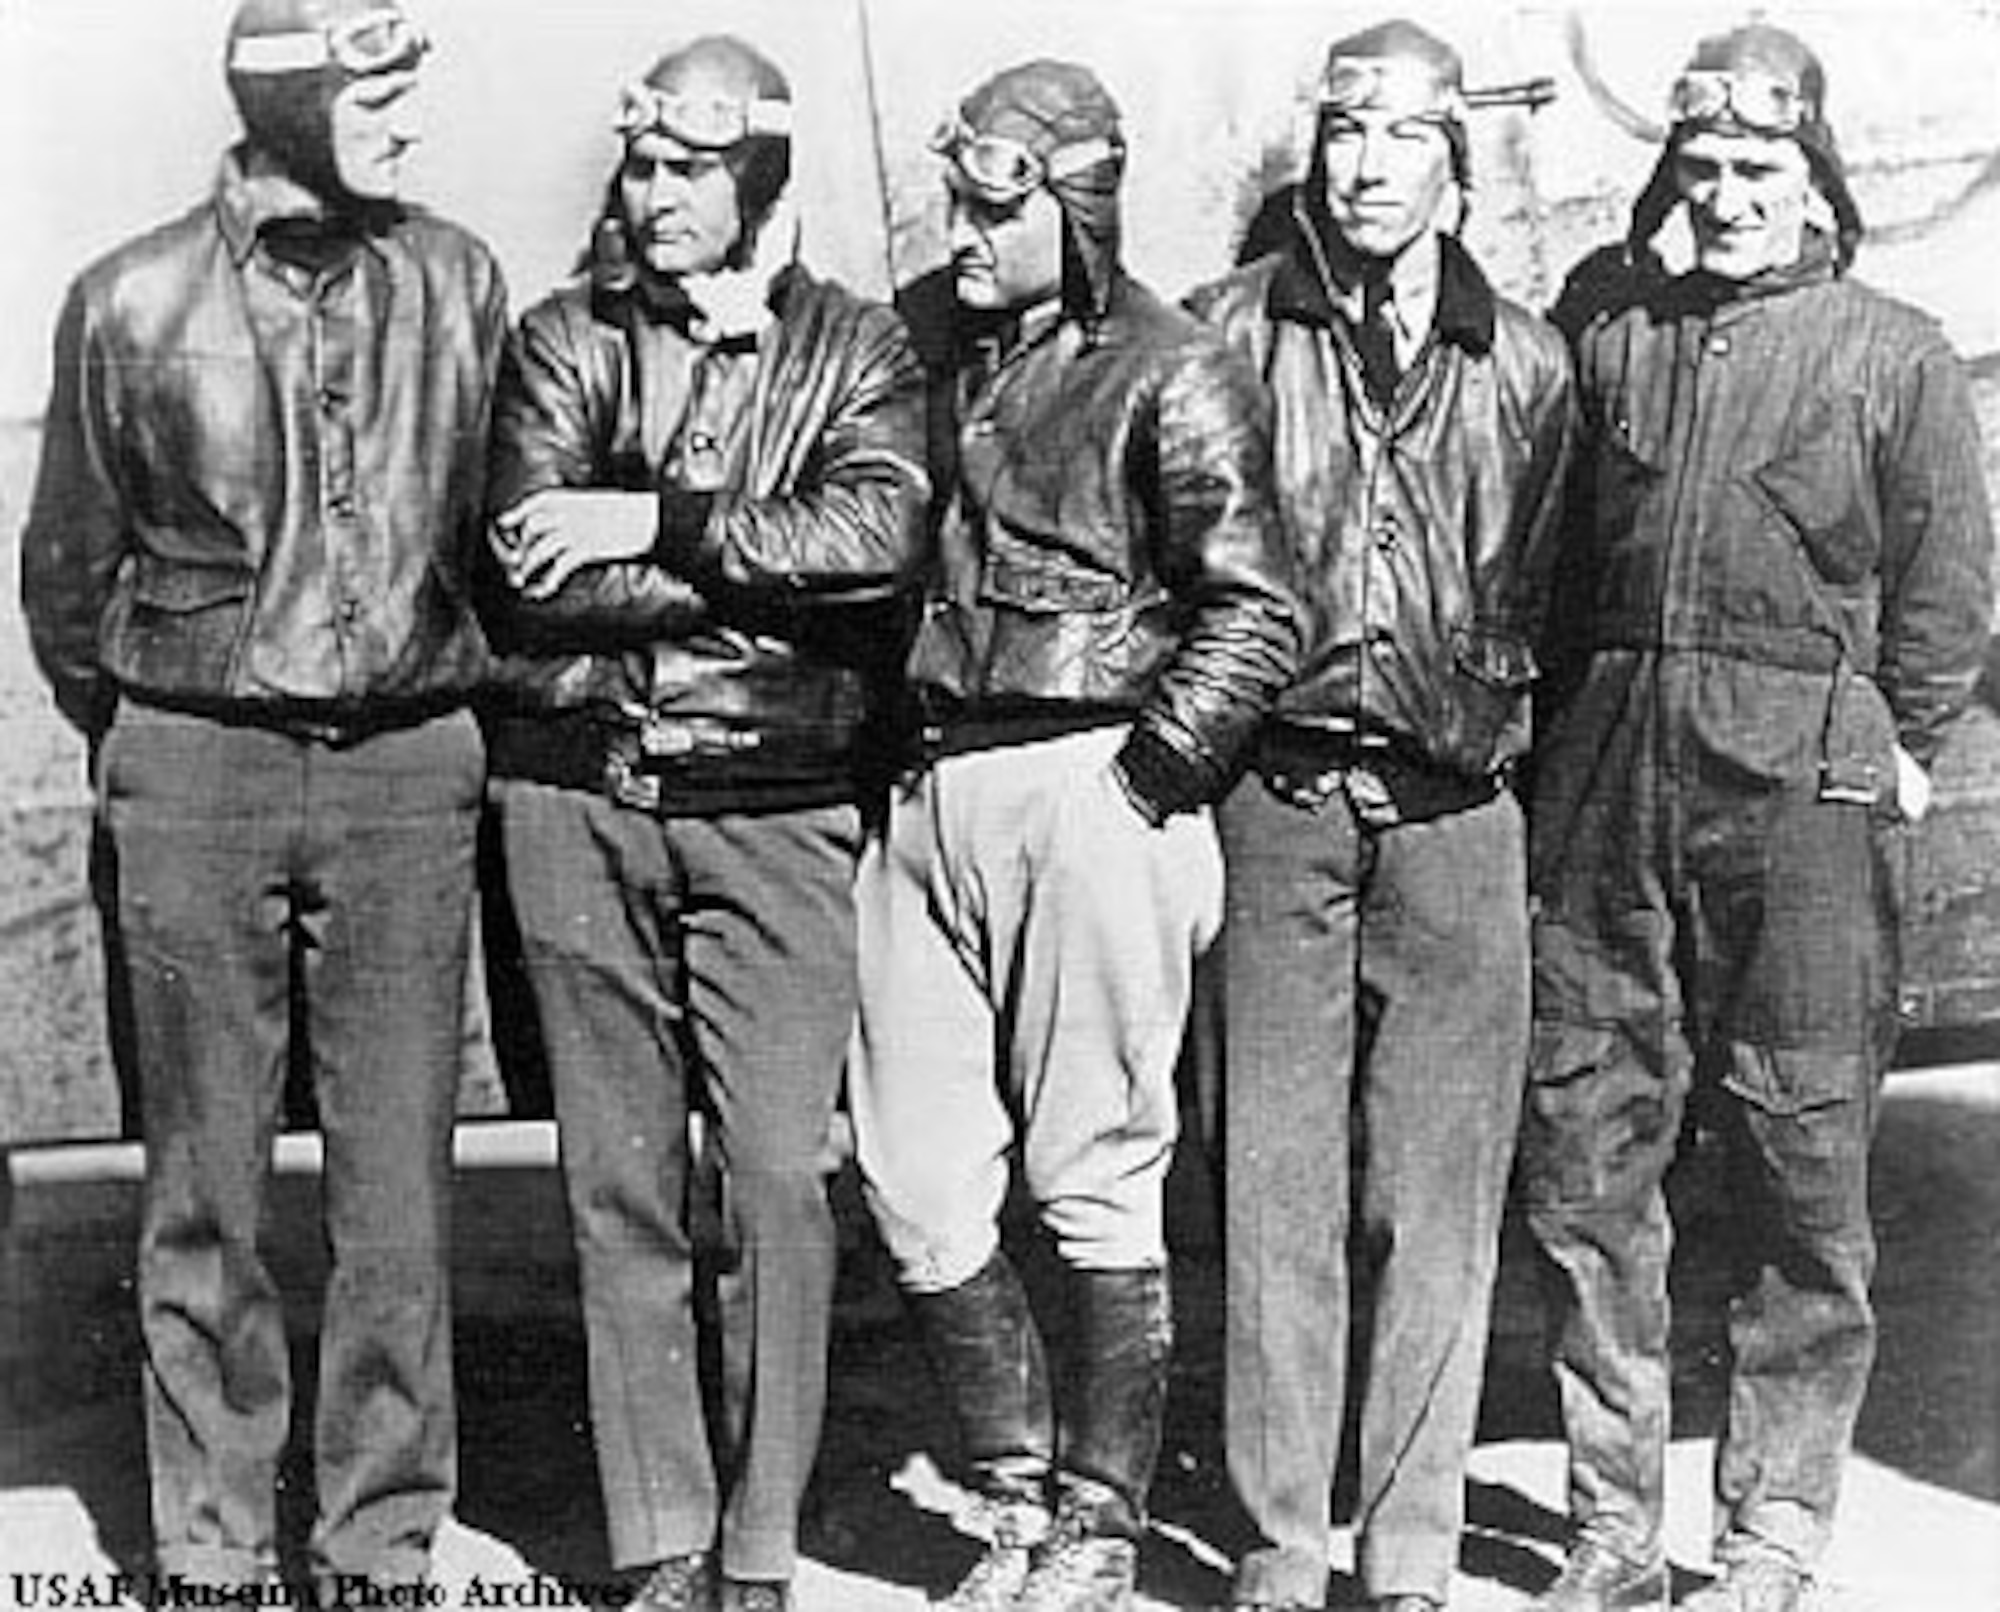 Crew of the "Question Mark." From left to right: Maj. Carl Spaatz, Capt. Ira Eaker, Lt. H.A. Halverson, Lt. E.R. Quesado and Sgt. R.W. Hooe. (U.S. Air Force photo)